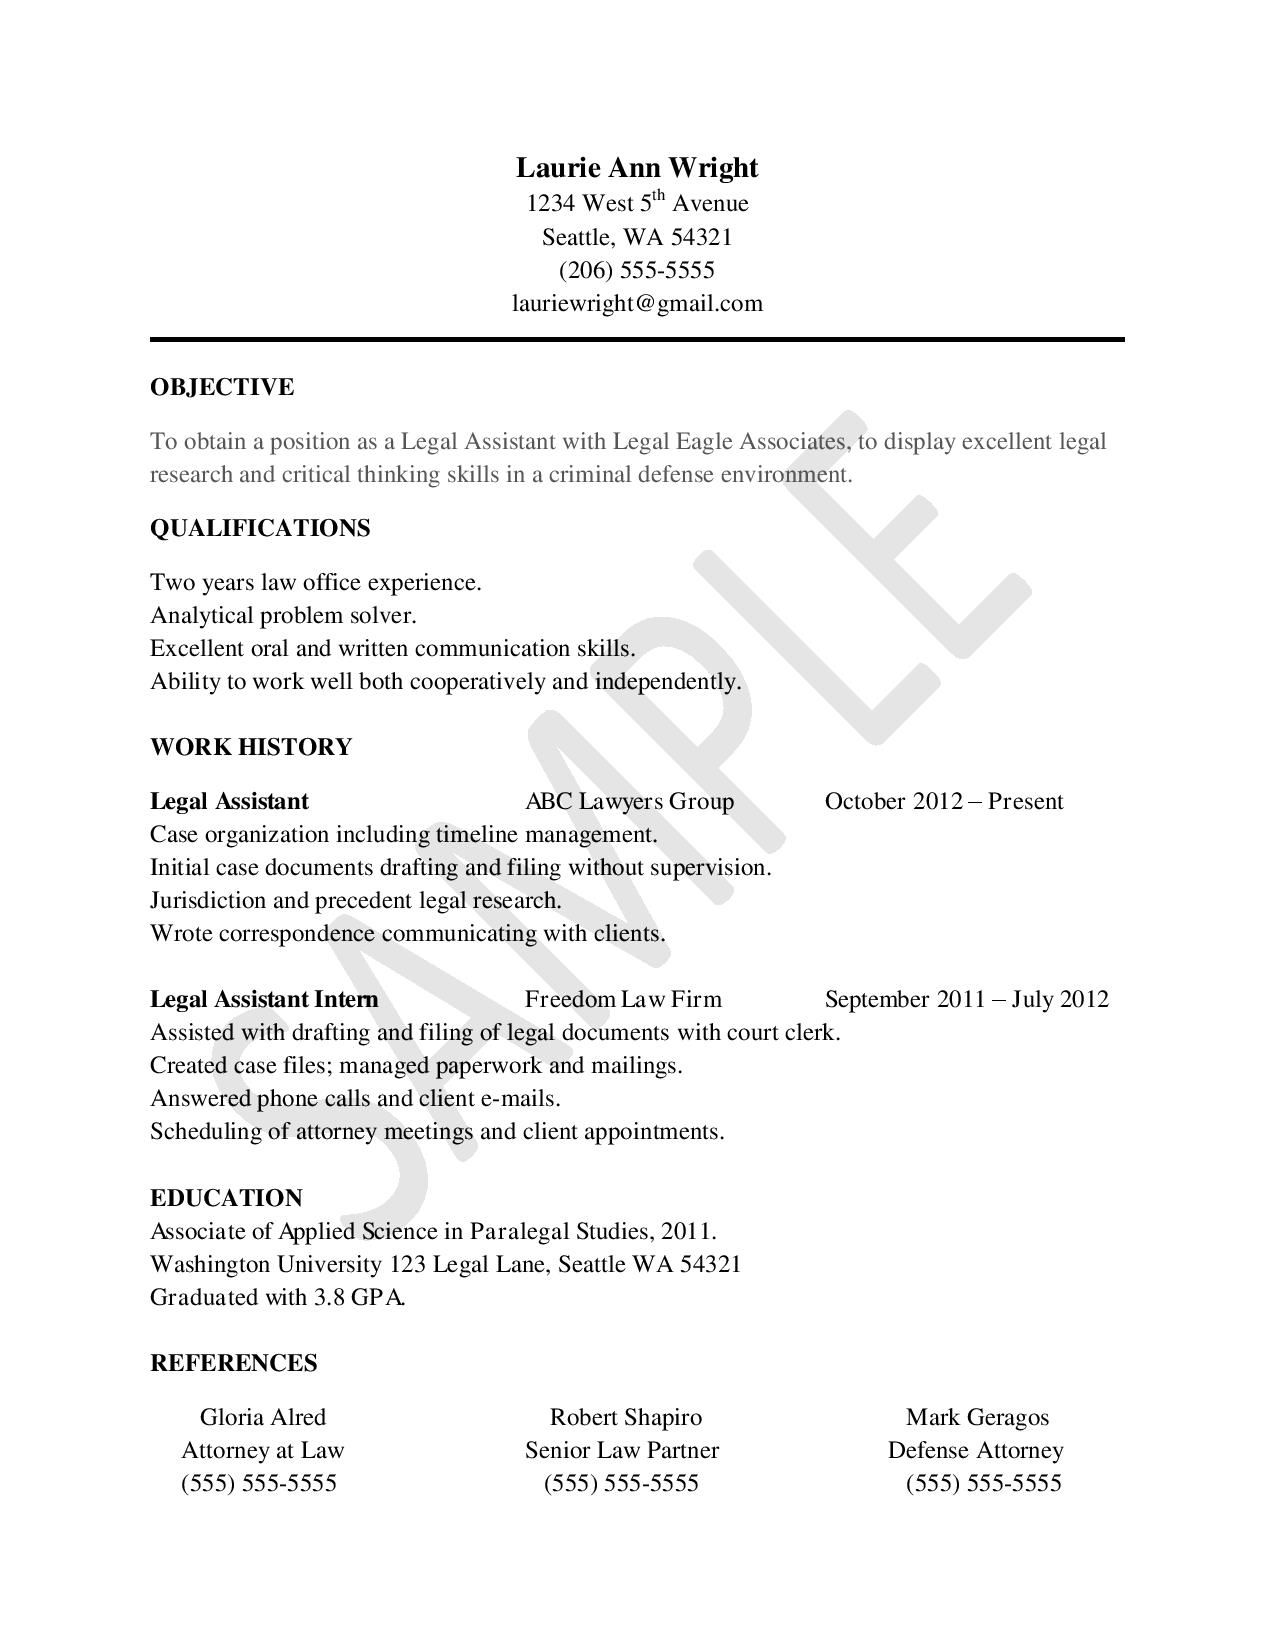 How To Format Punctuation Grammar Resume Pdf